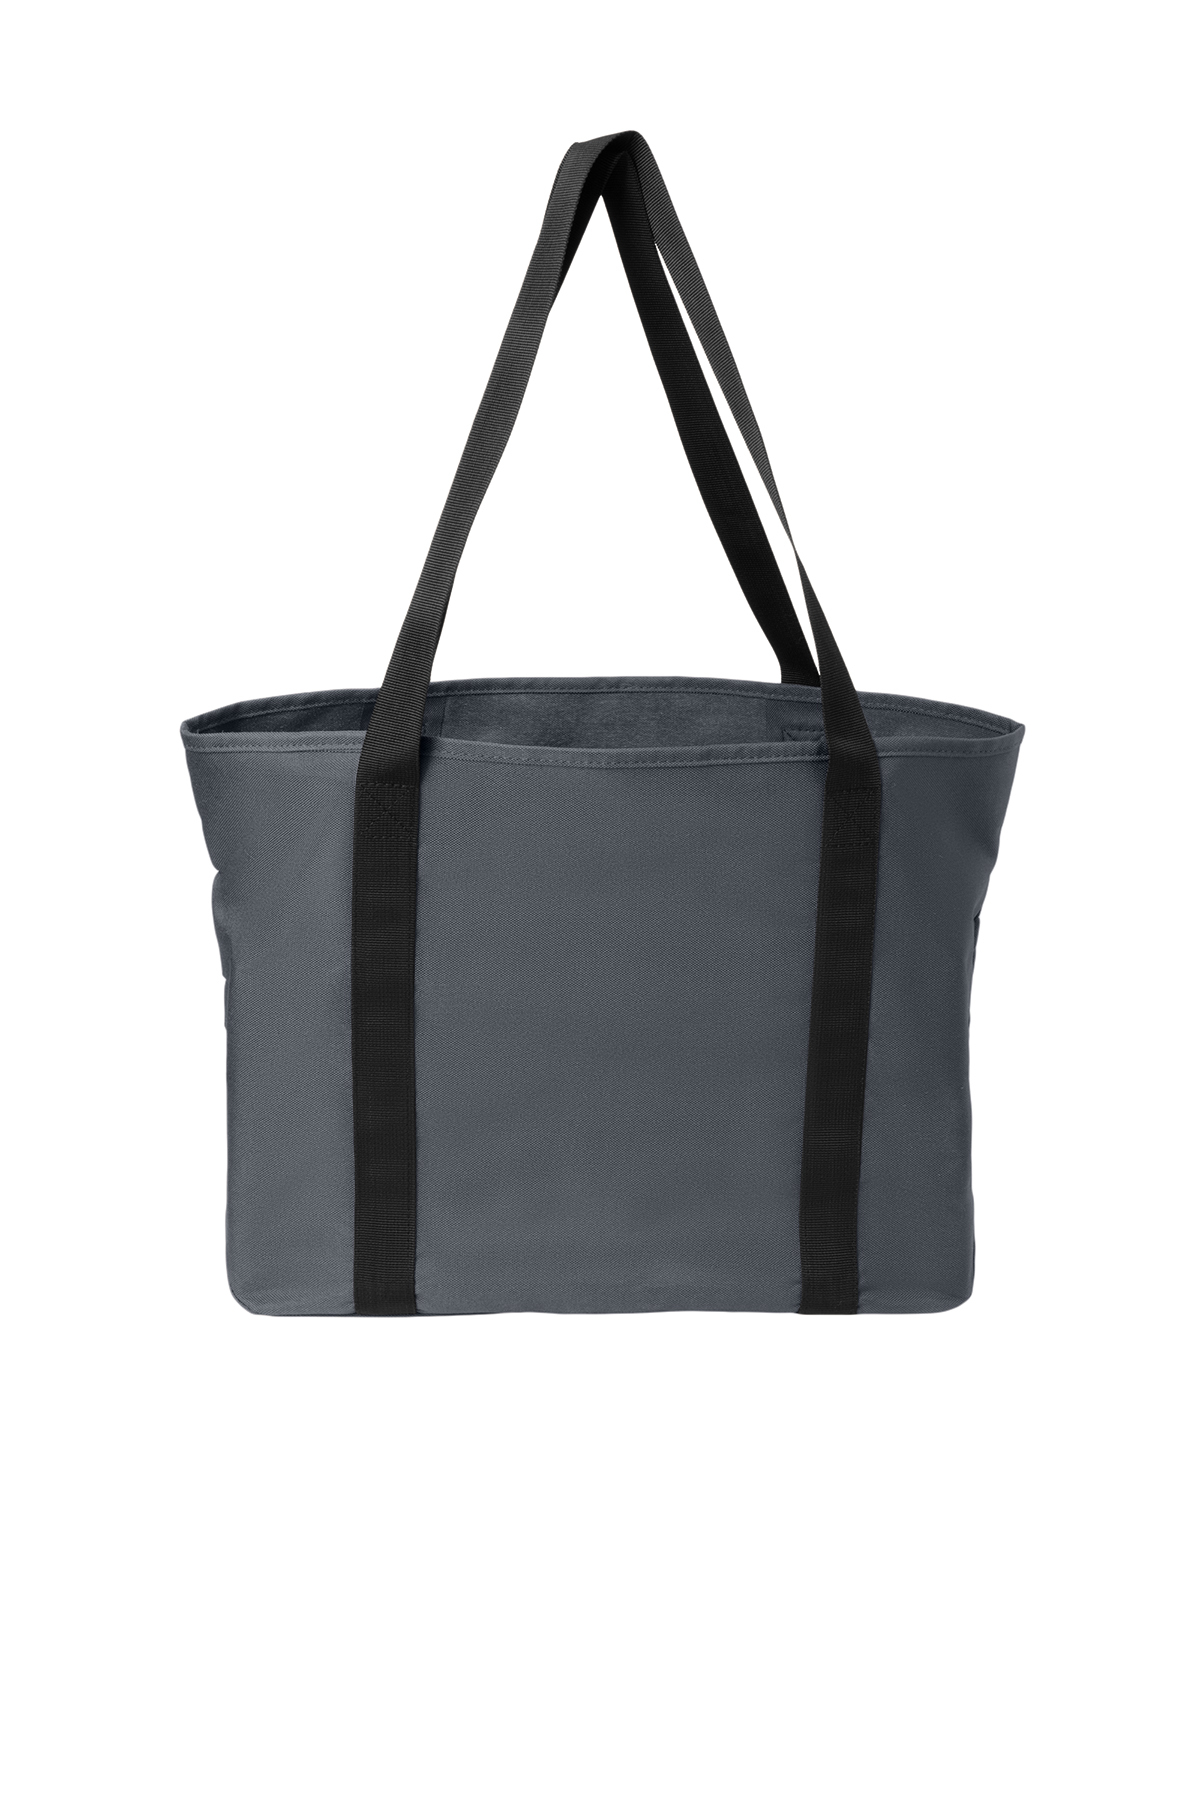 Port Authority C-FREE Recycled Tote | Product | SanMar